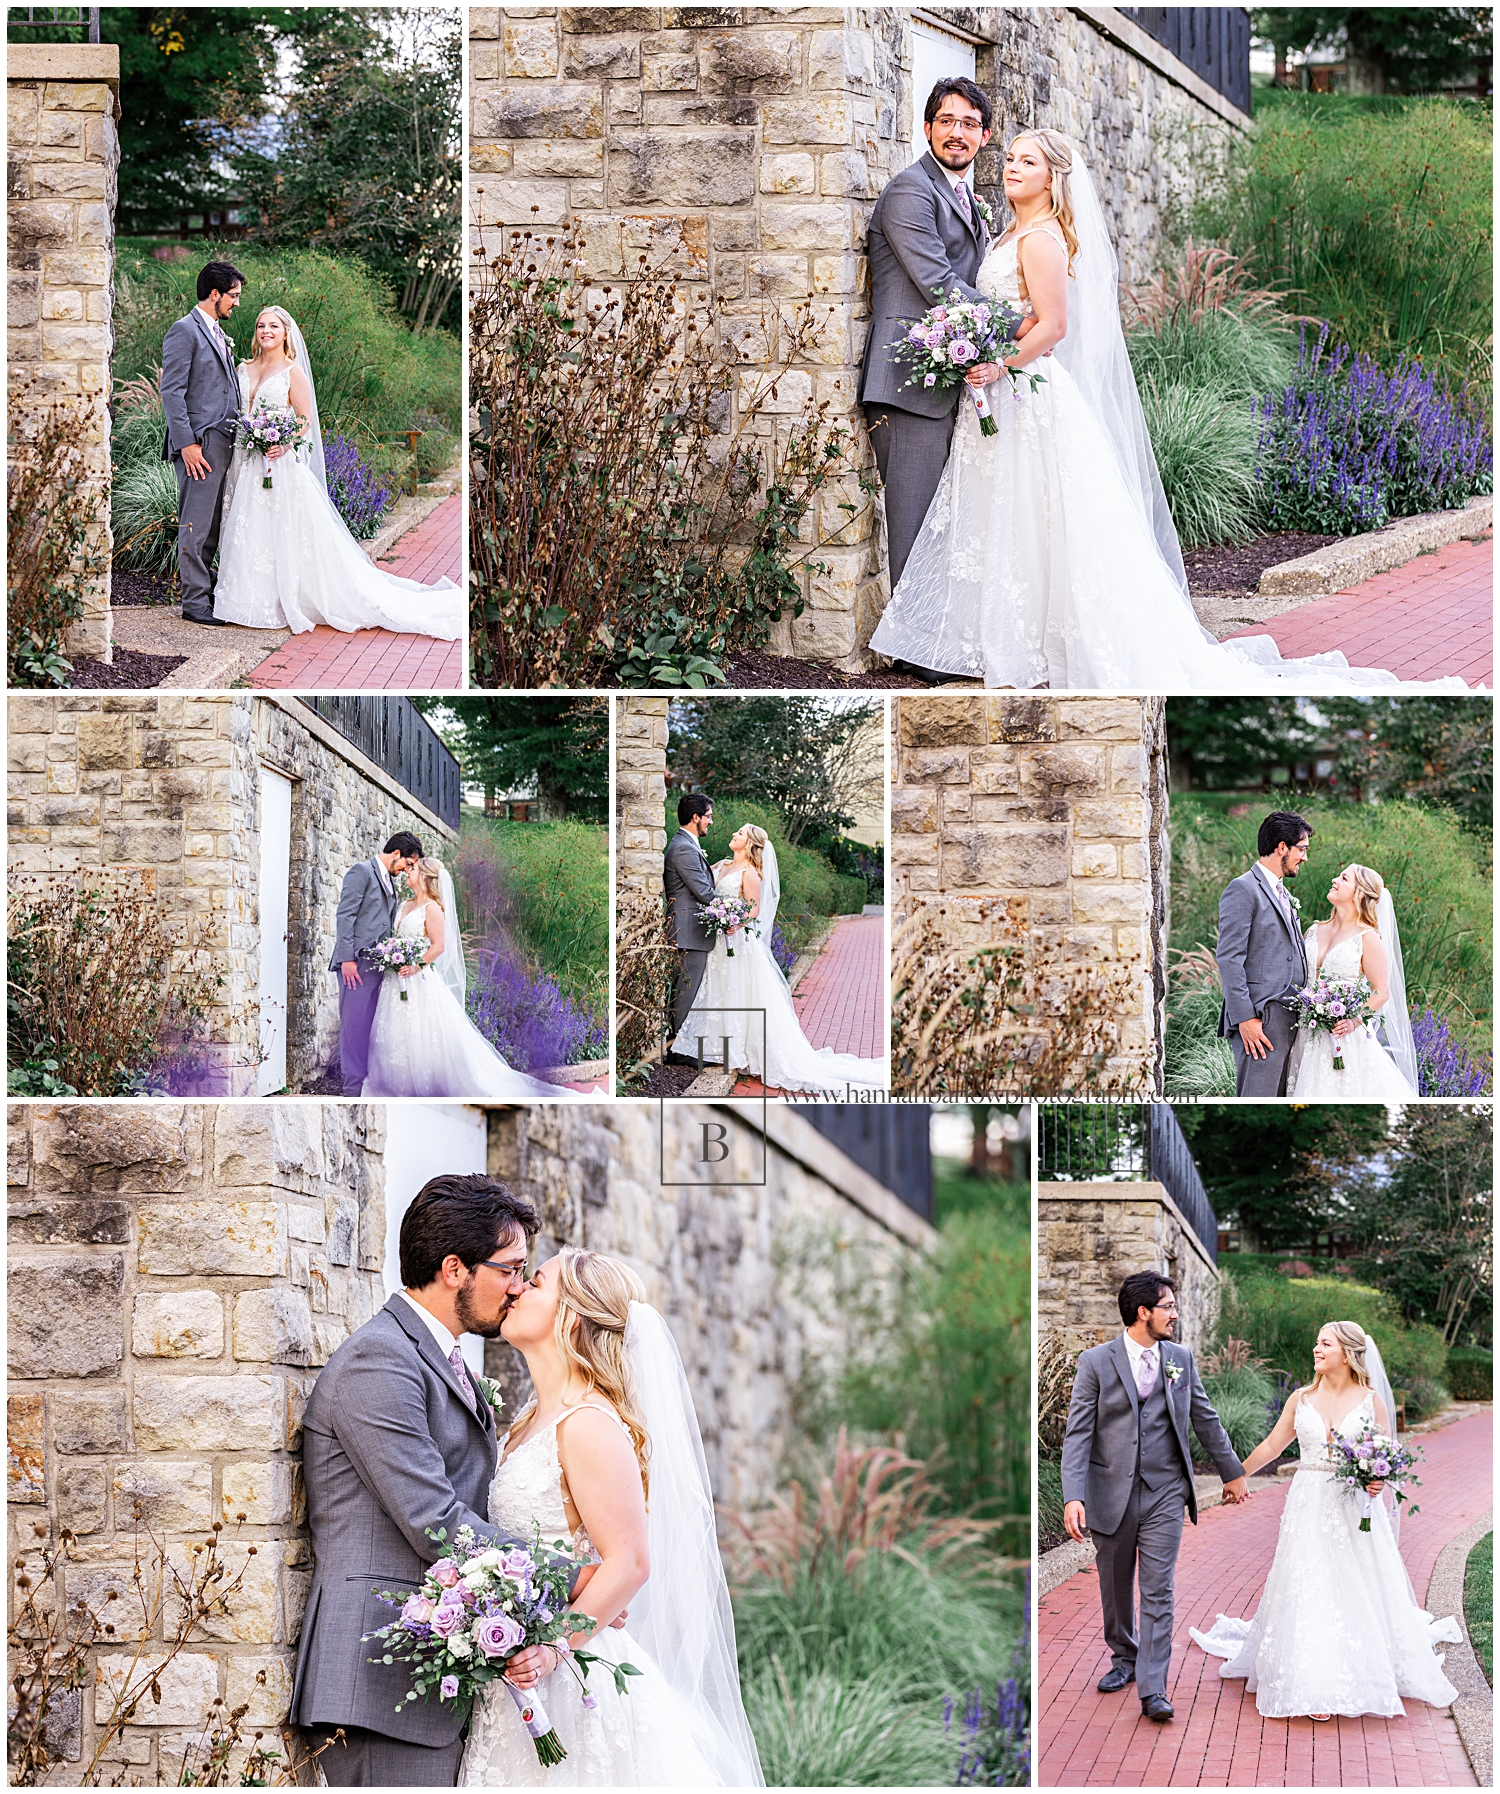 Wedding couple stands by stone wall surrounded by purple flowers.